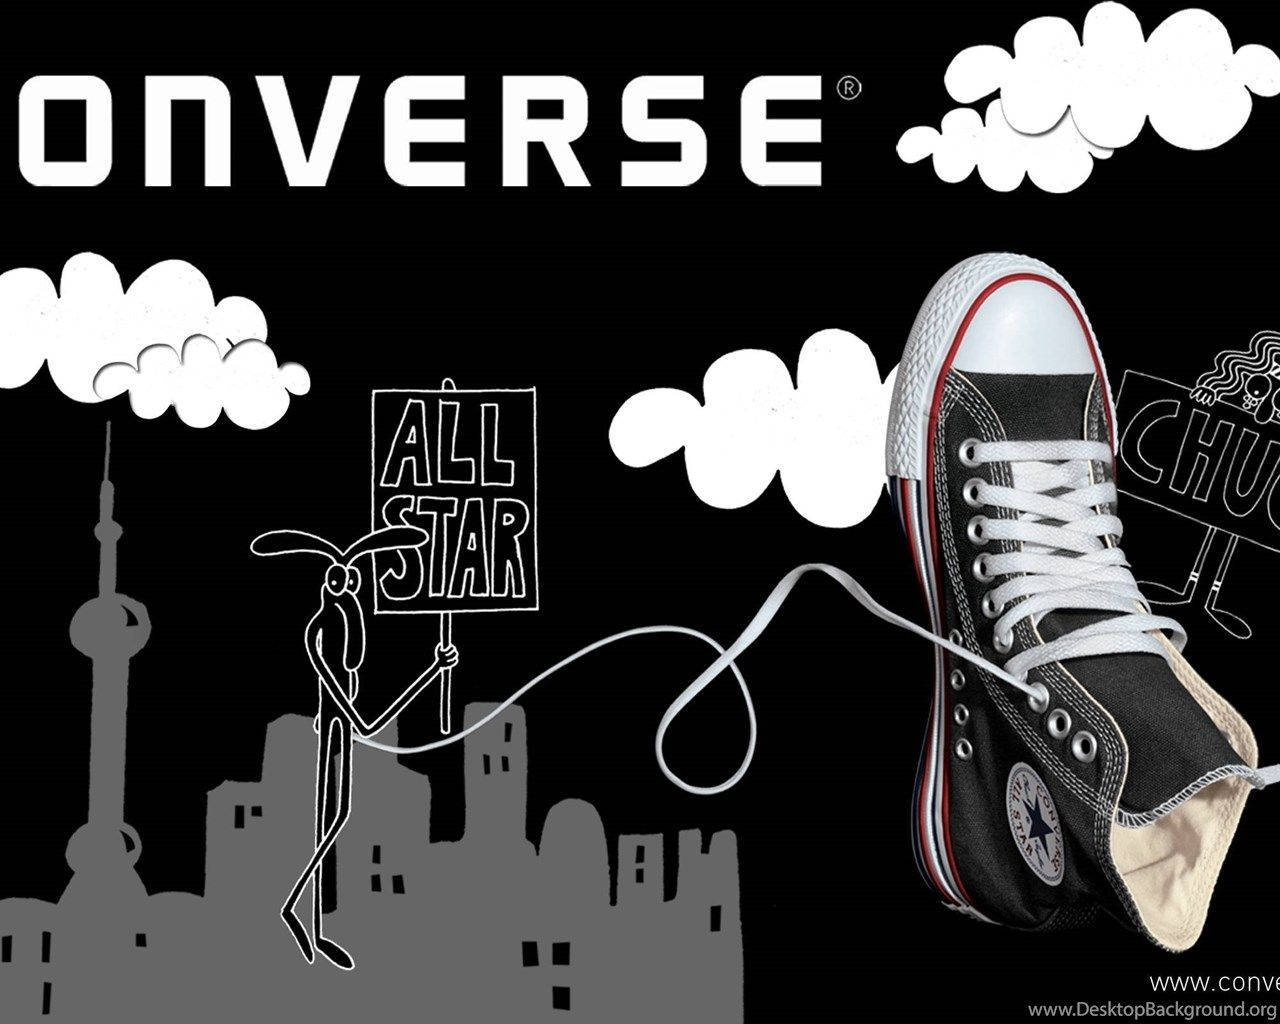 Converse 1280X1024 Wallpaper and Background Image